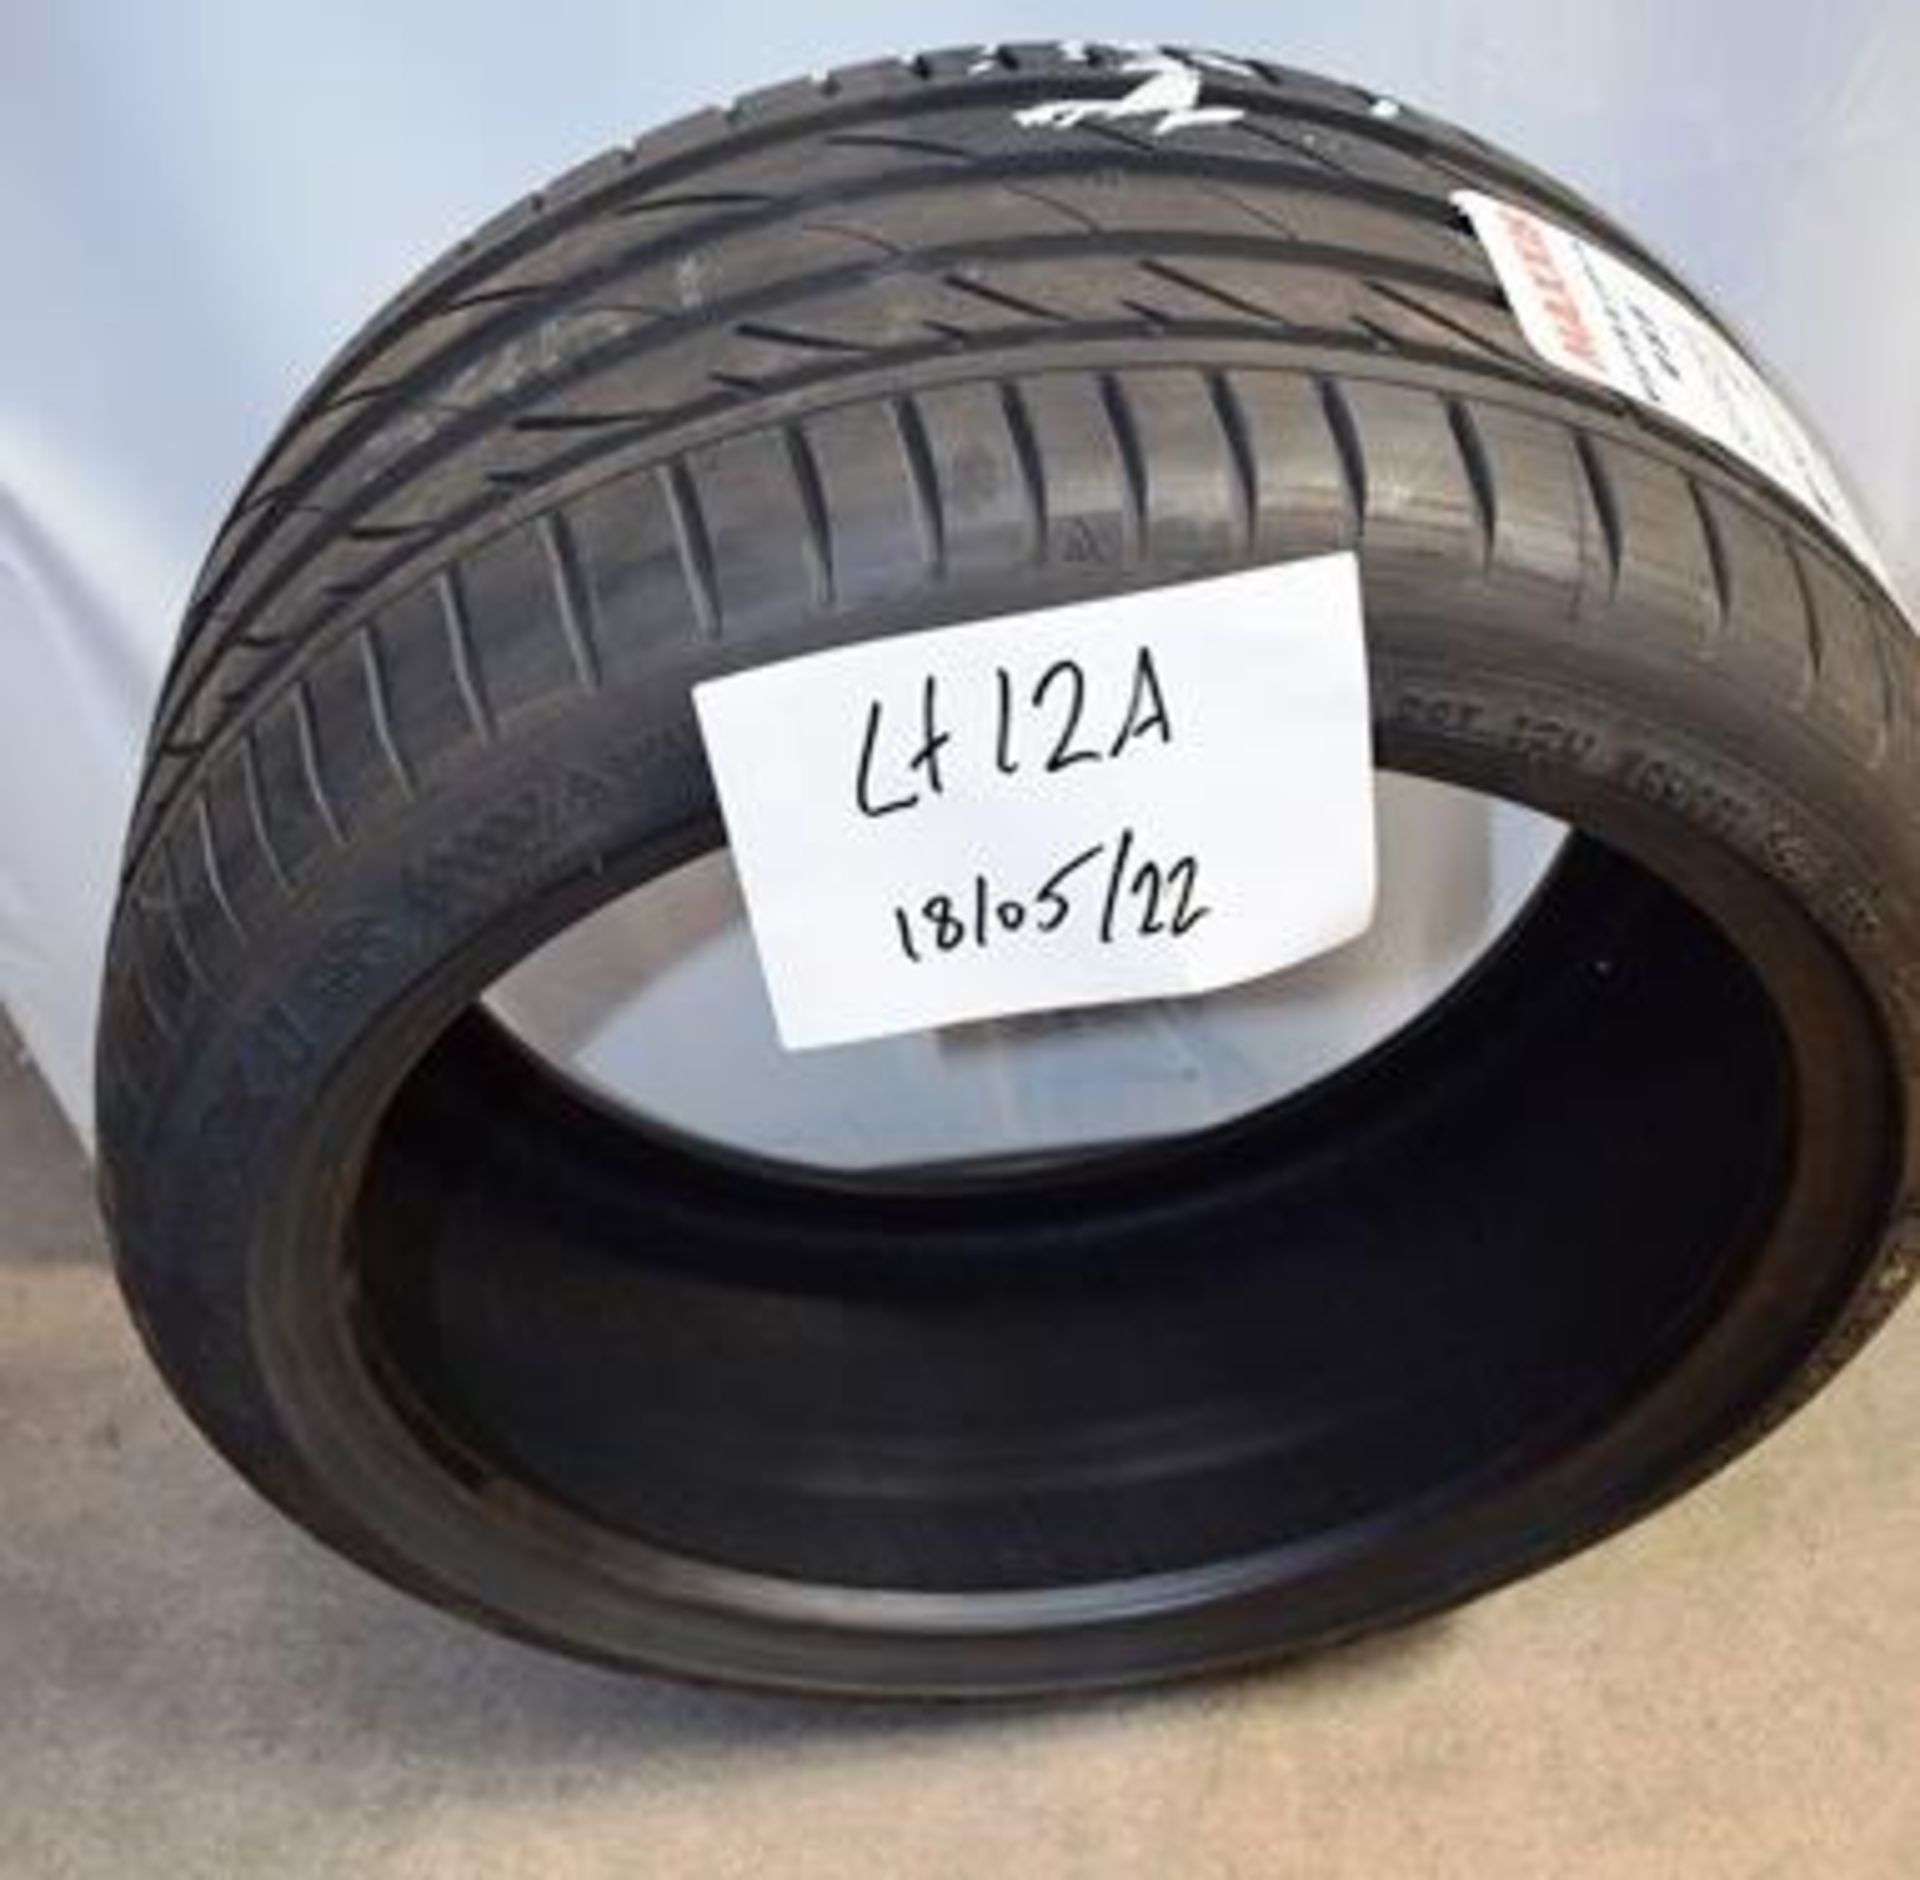 1 x Maxxis Victra Sport 5 VS5 tyre, size 245/35ZR18 92Y - new with label (GS2)